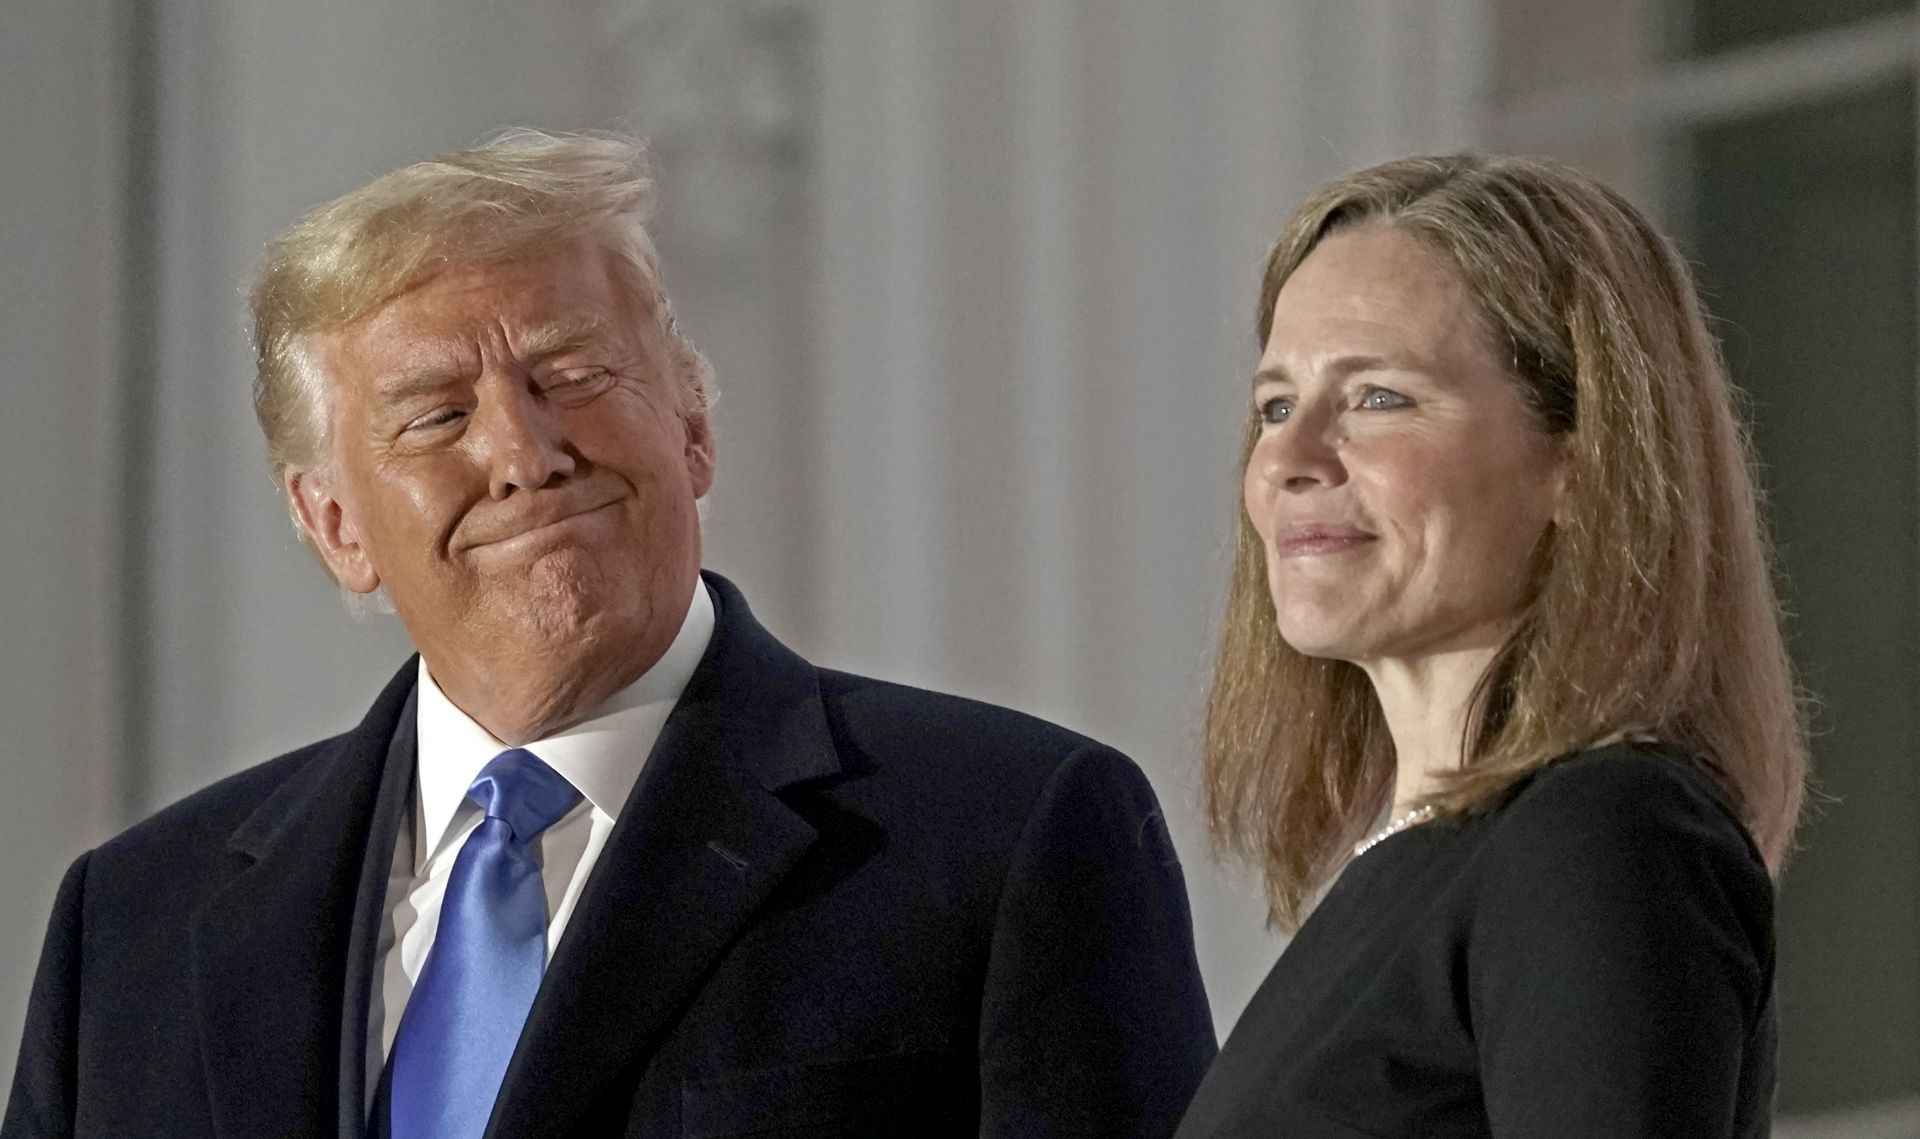 epa08776633 United States President Donald J. Trump (L) and Justice Amy Coney Barrett (R) pose for a photo on the Blue Room Balcony of the White House in Washington, DC, USA, 26 October 2020.  EPA/Ken Cedeno / POOL